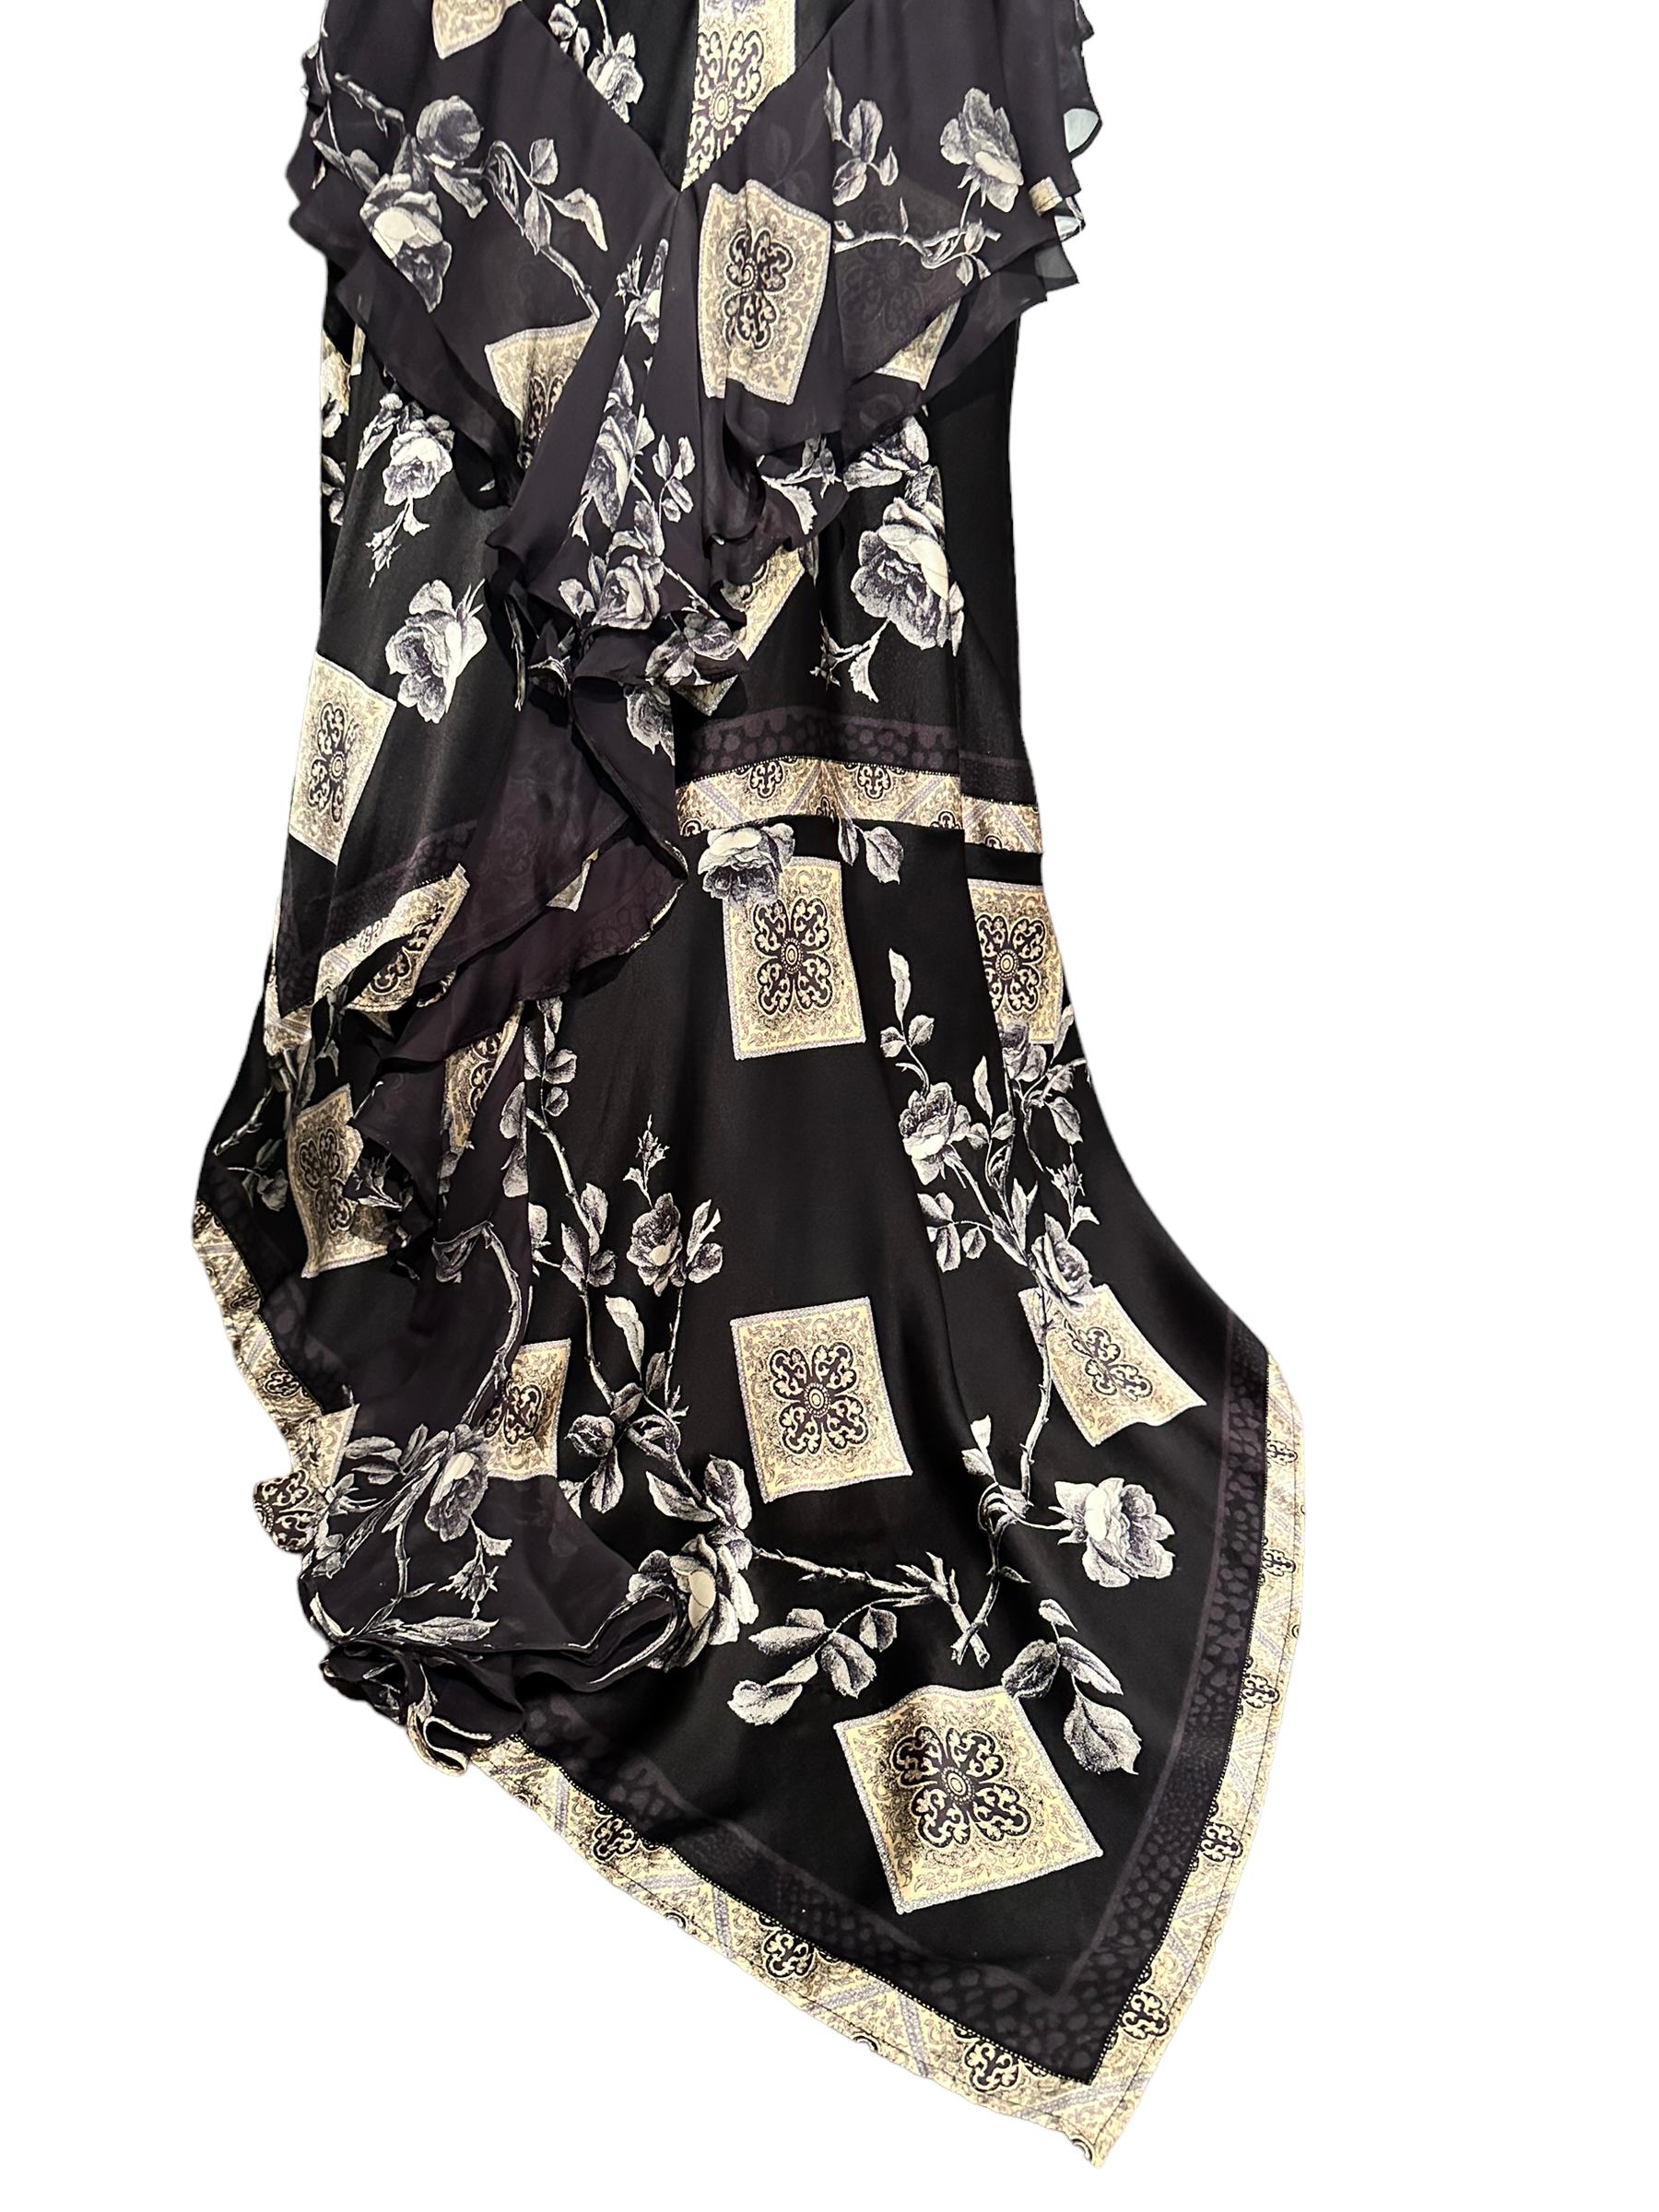 ICONIC FW 2005 Roberto Cavalli Chinoiserie Print Black and Gold Silk Bias Gown For Sale 4